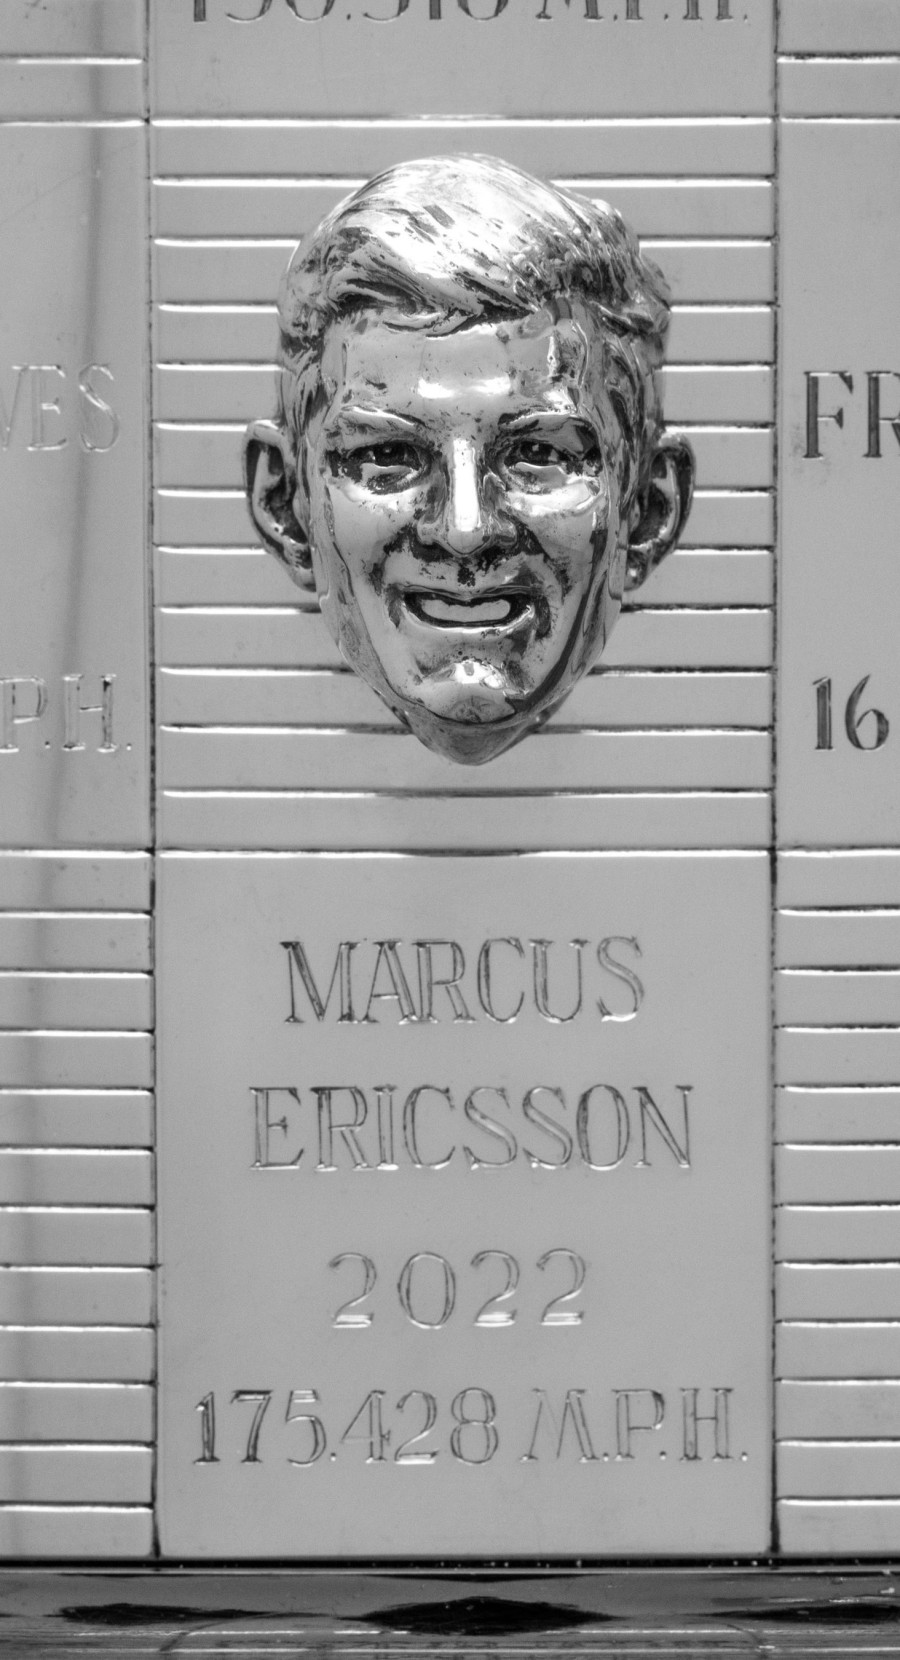 2022 Indianapolis 500 winner Marcus Ericsson’s image is permanently affixed to the Borg-Warner Trophy, along with his name, winning year and average speed.